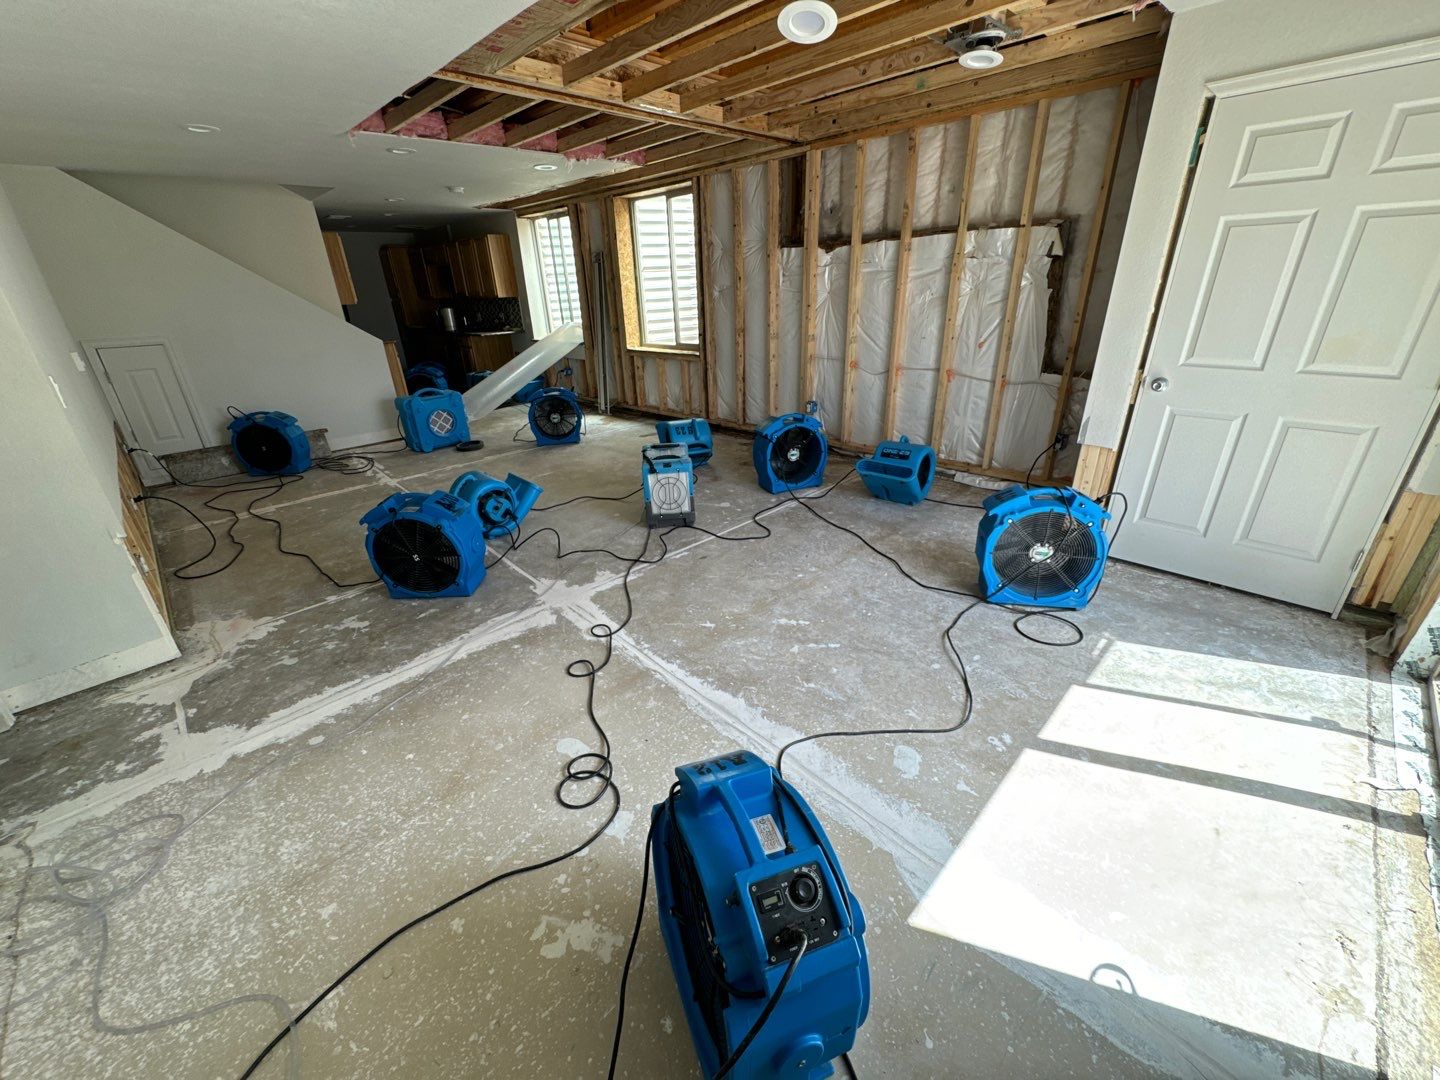 Water Damage from Summer Floods: How to Stay Safe